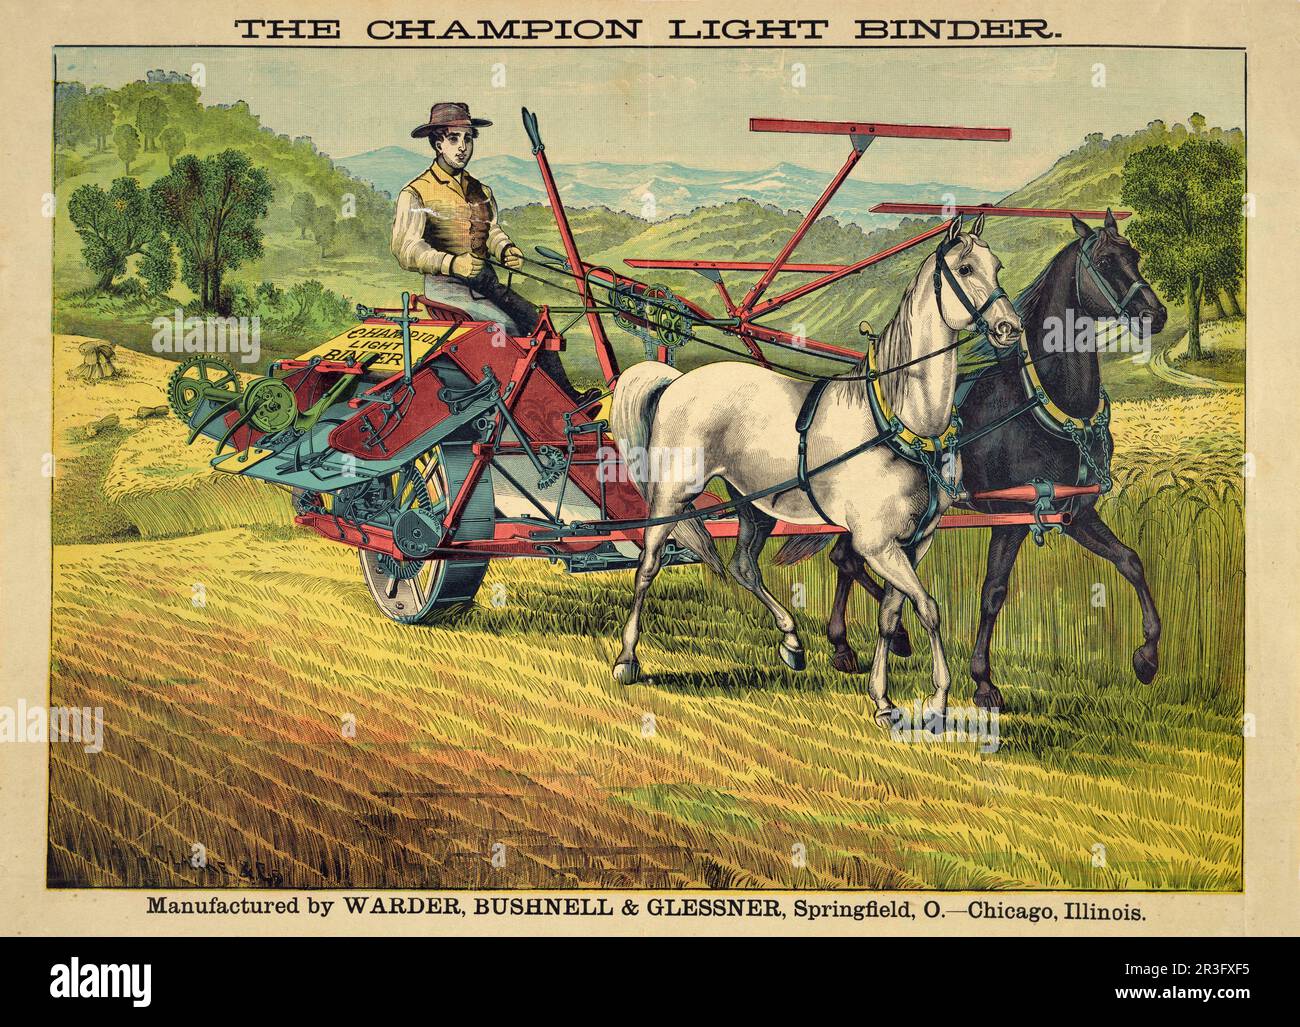 Vintage print of a farmer working with a Champion light binder machine. Stock Photo